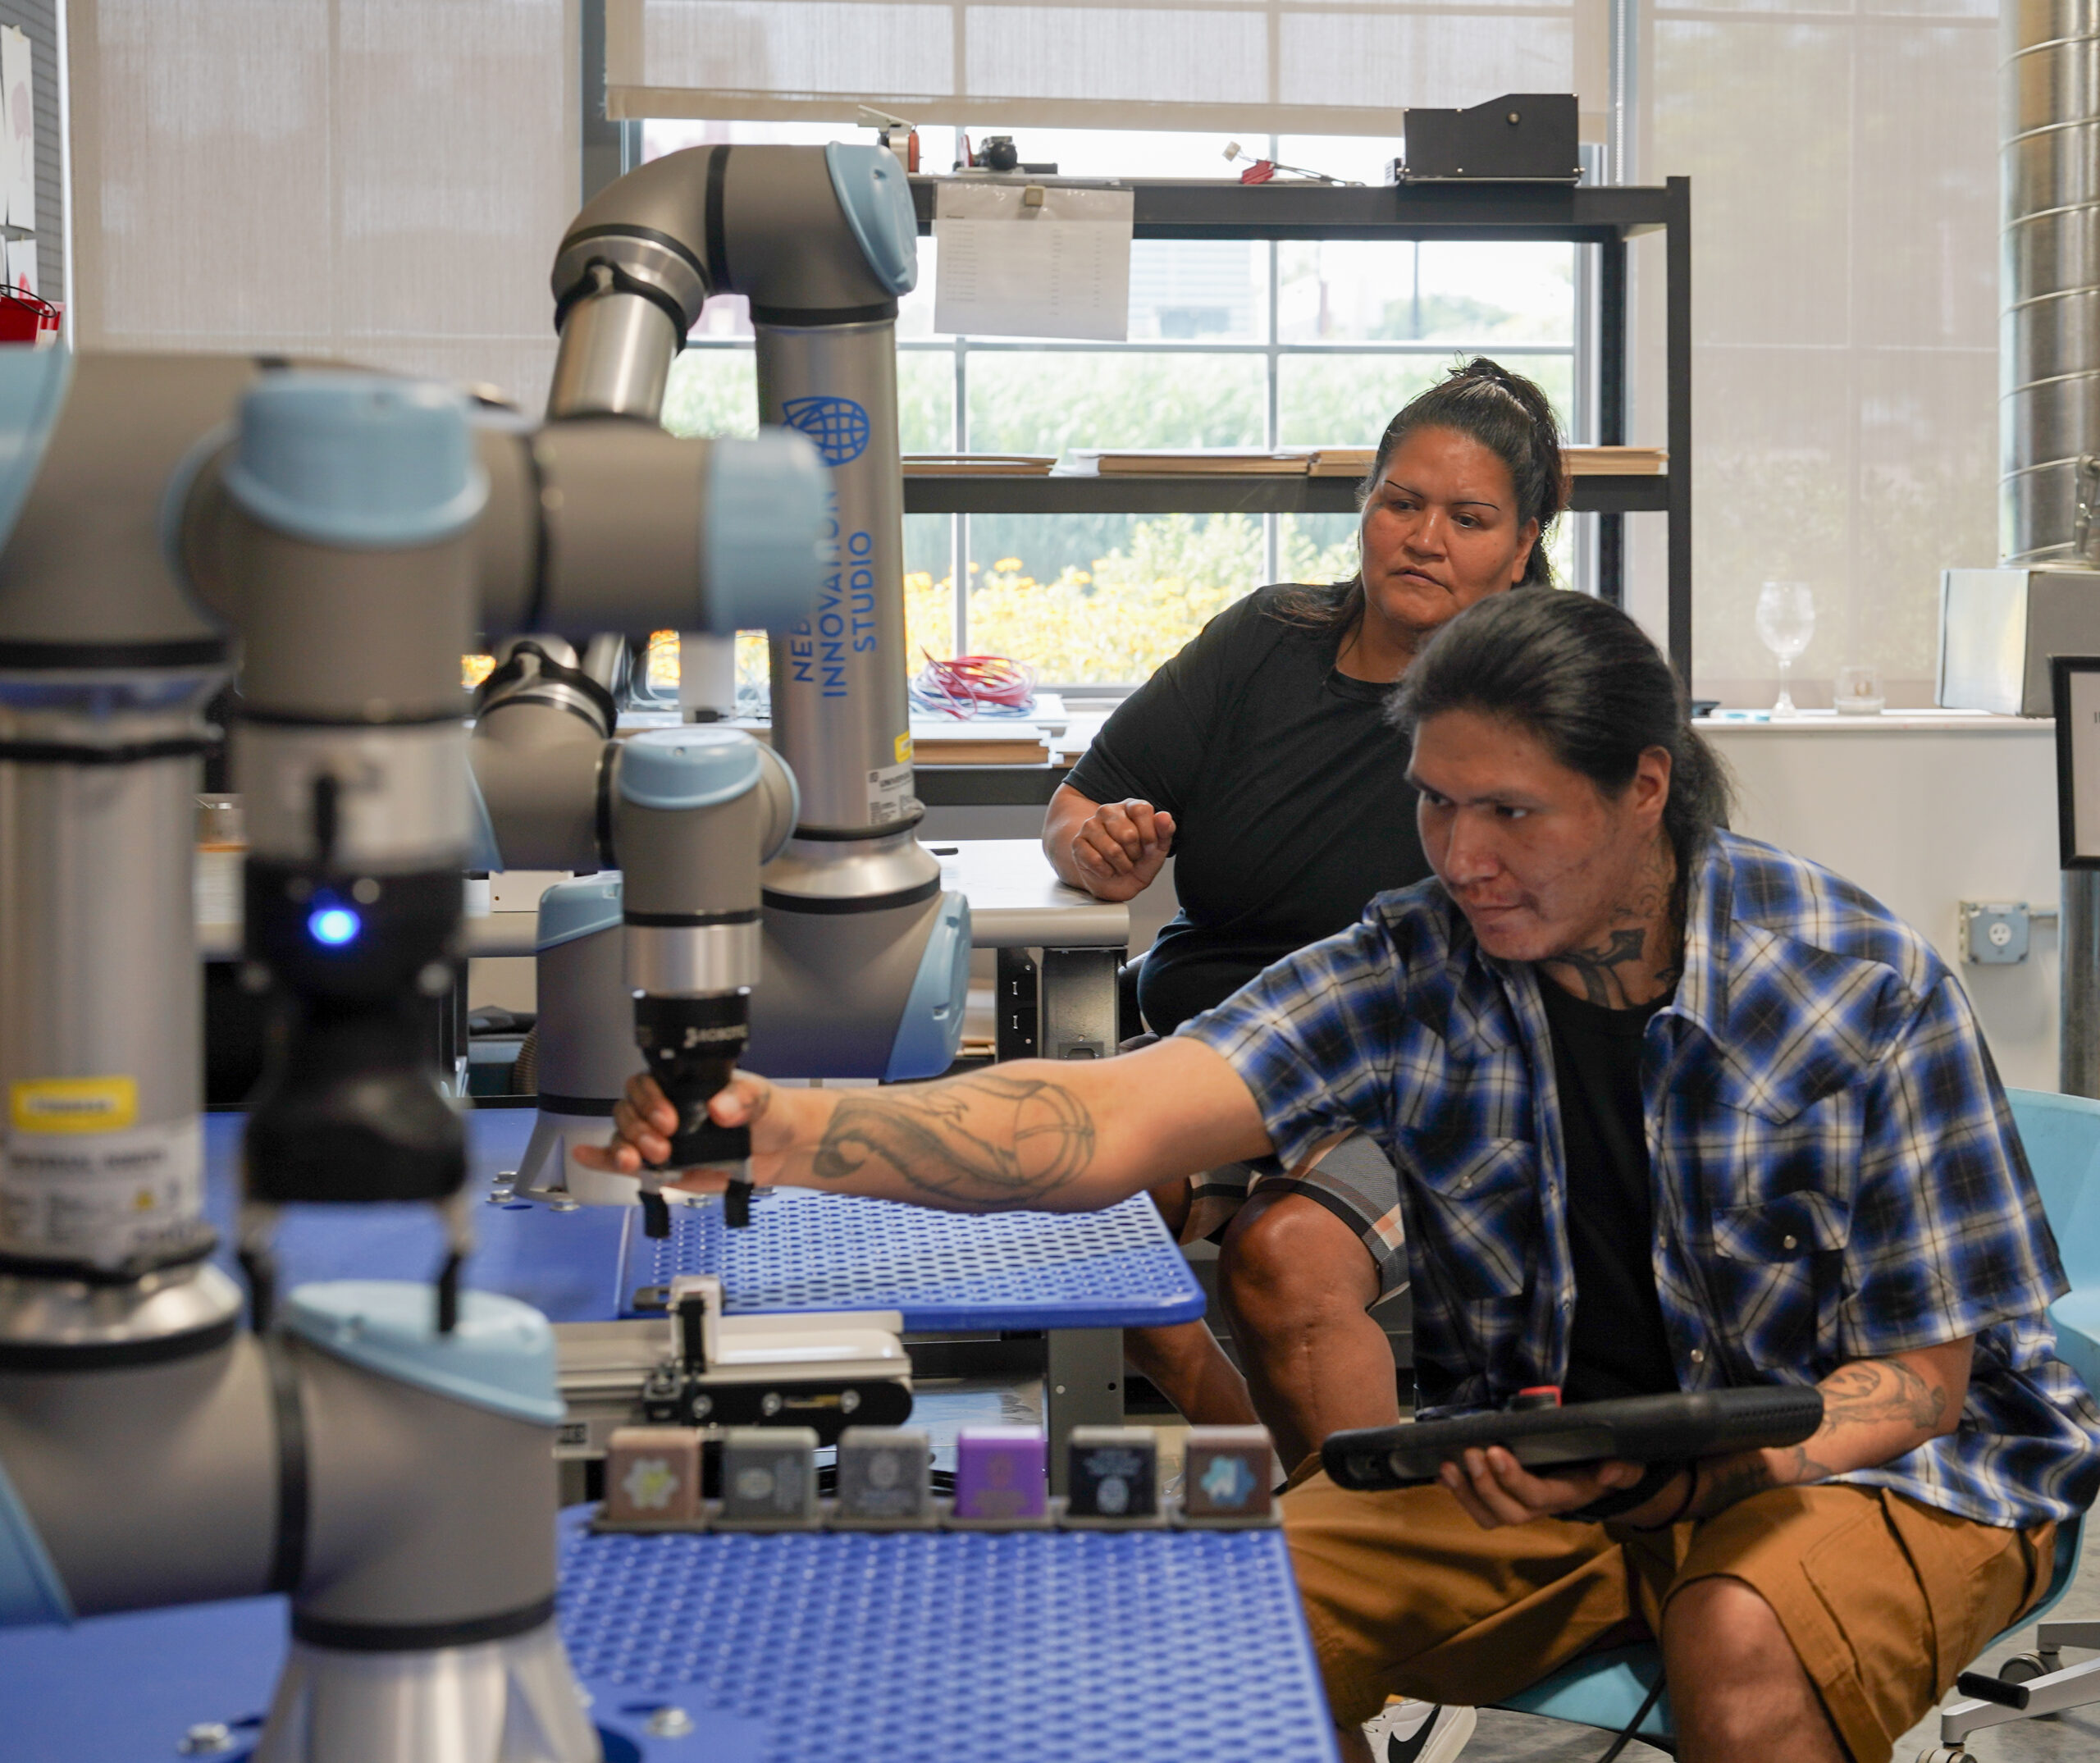 Transformational Training and Workforce Development with Industrial Robotics